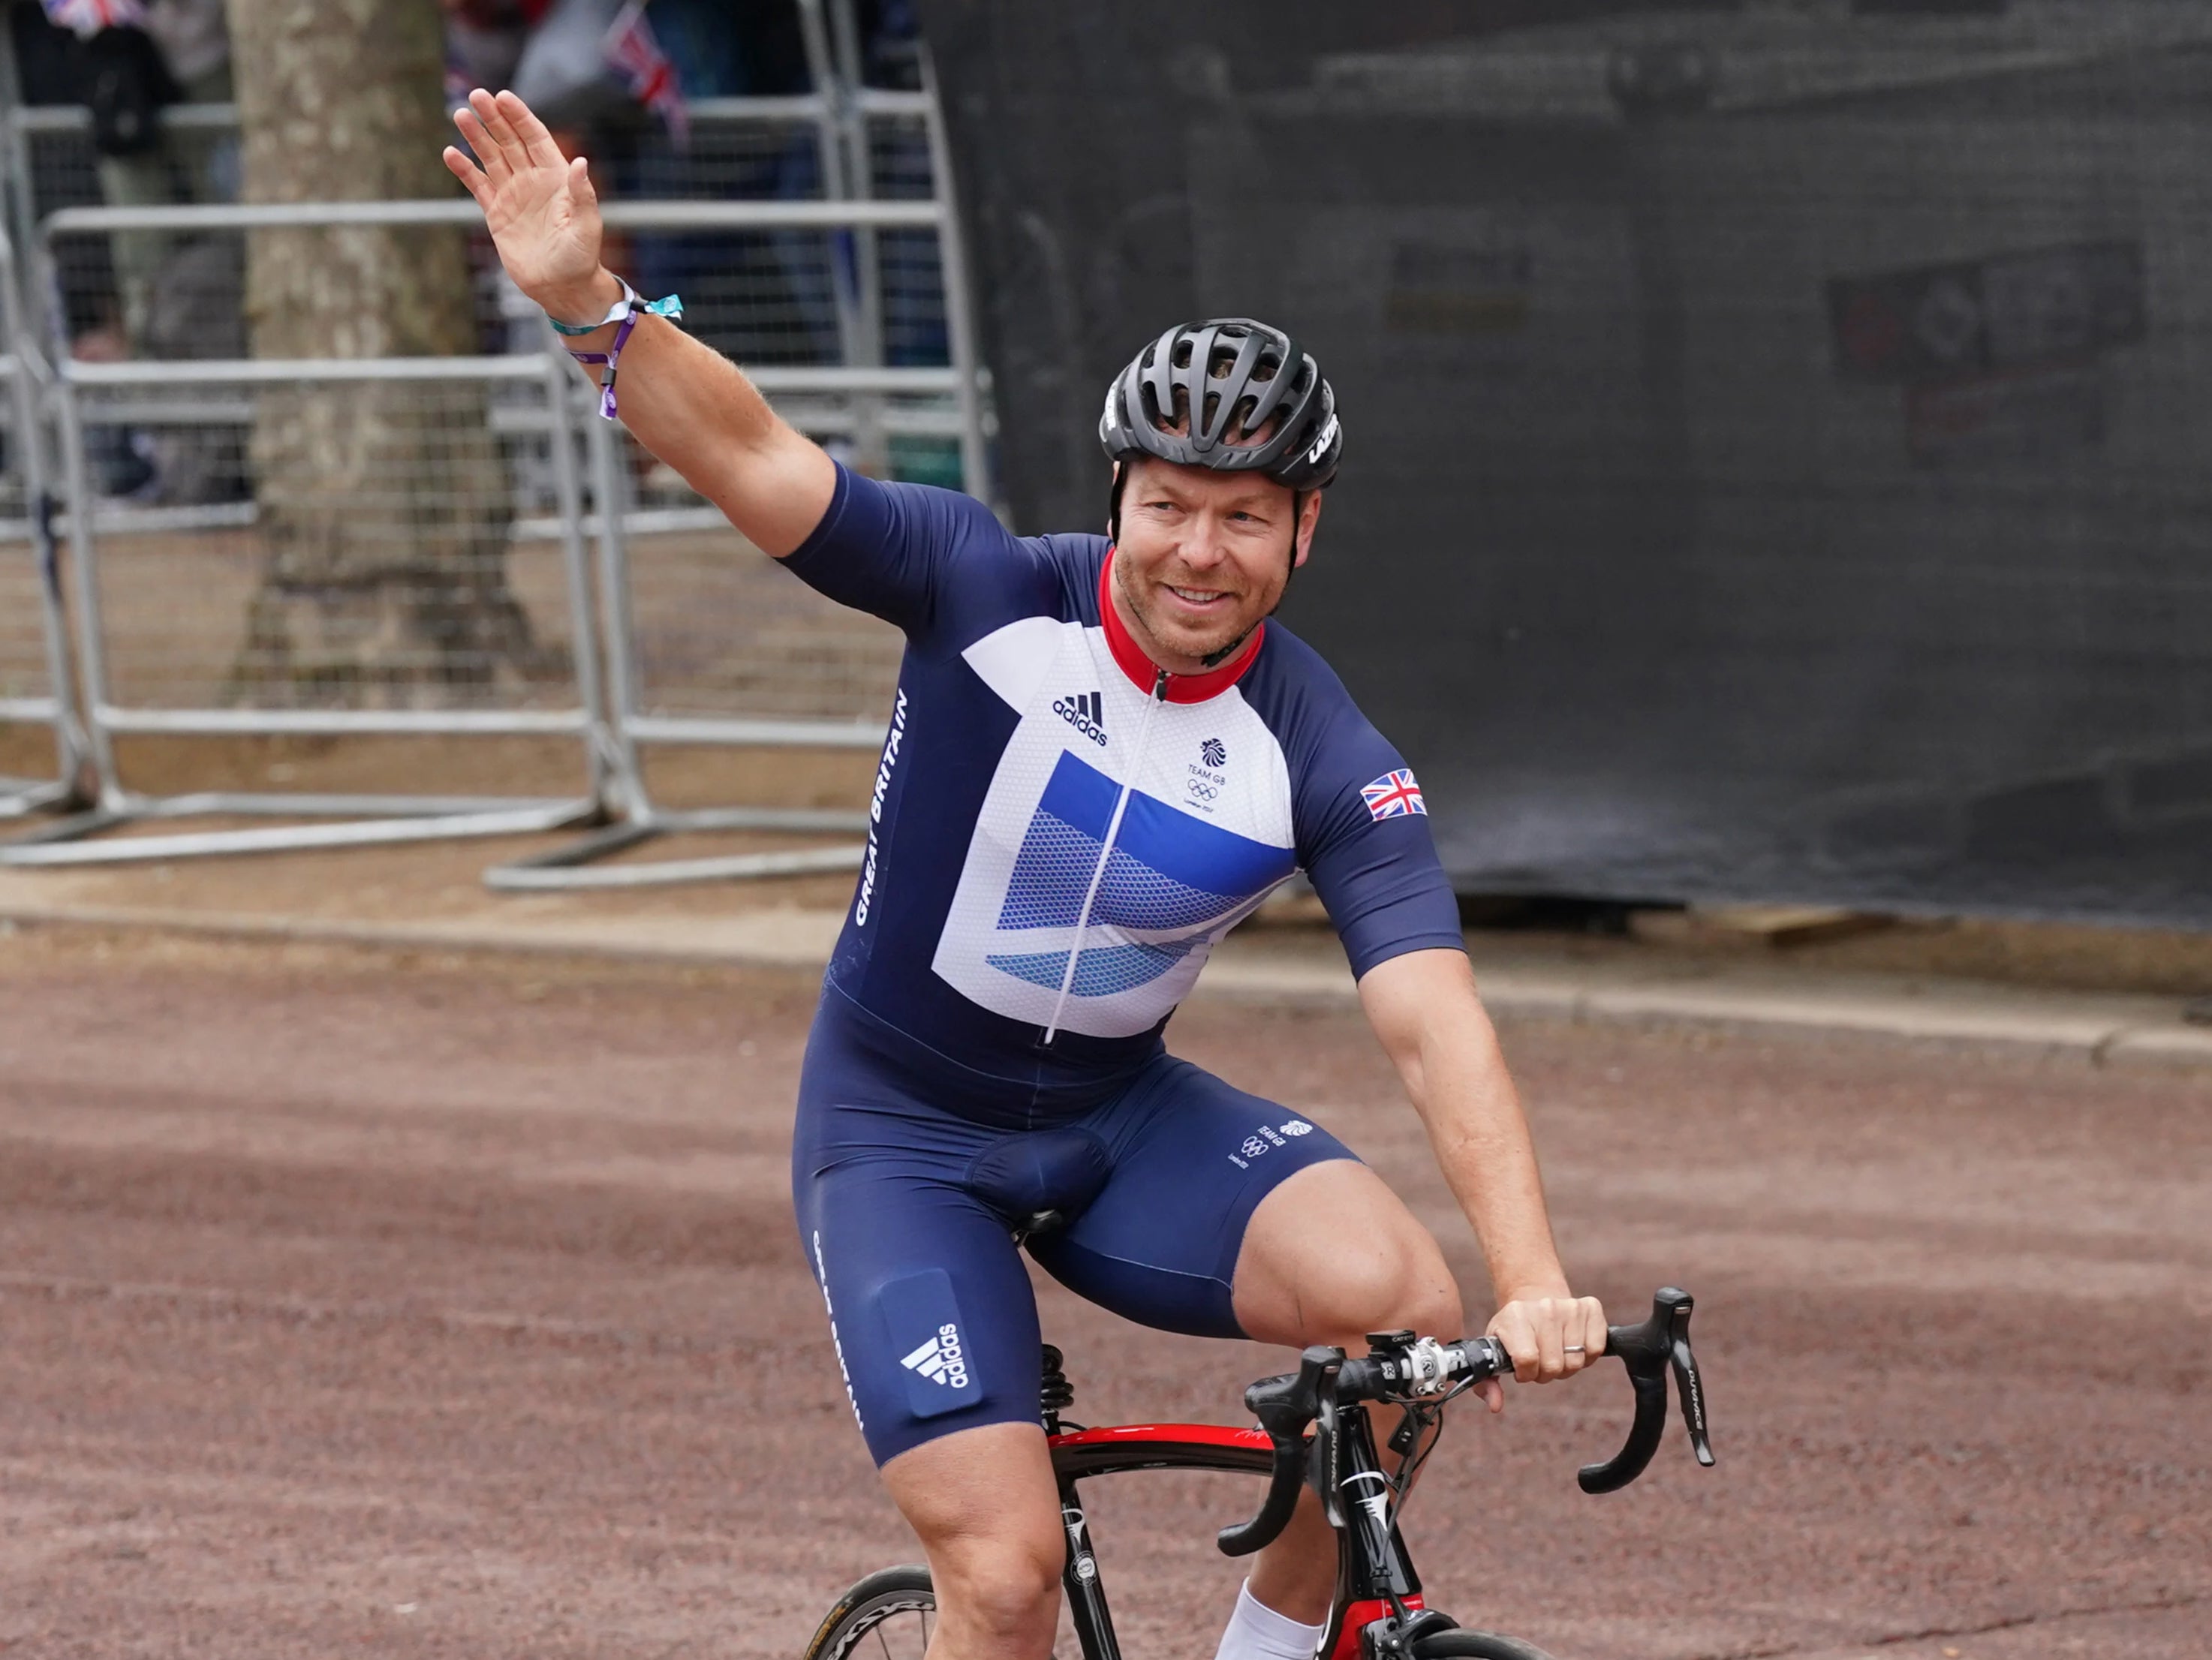 Sir Chris Hoy cycles during the Platinum Jubilee Pageant in front of Buckingham Palace, London, on day four of the Platinum Jubilee celebrations. Picture date: Sunday June 5, 2022.